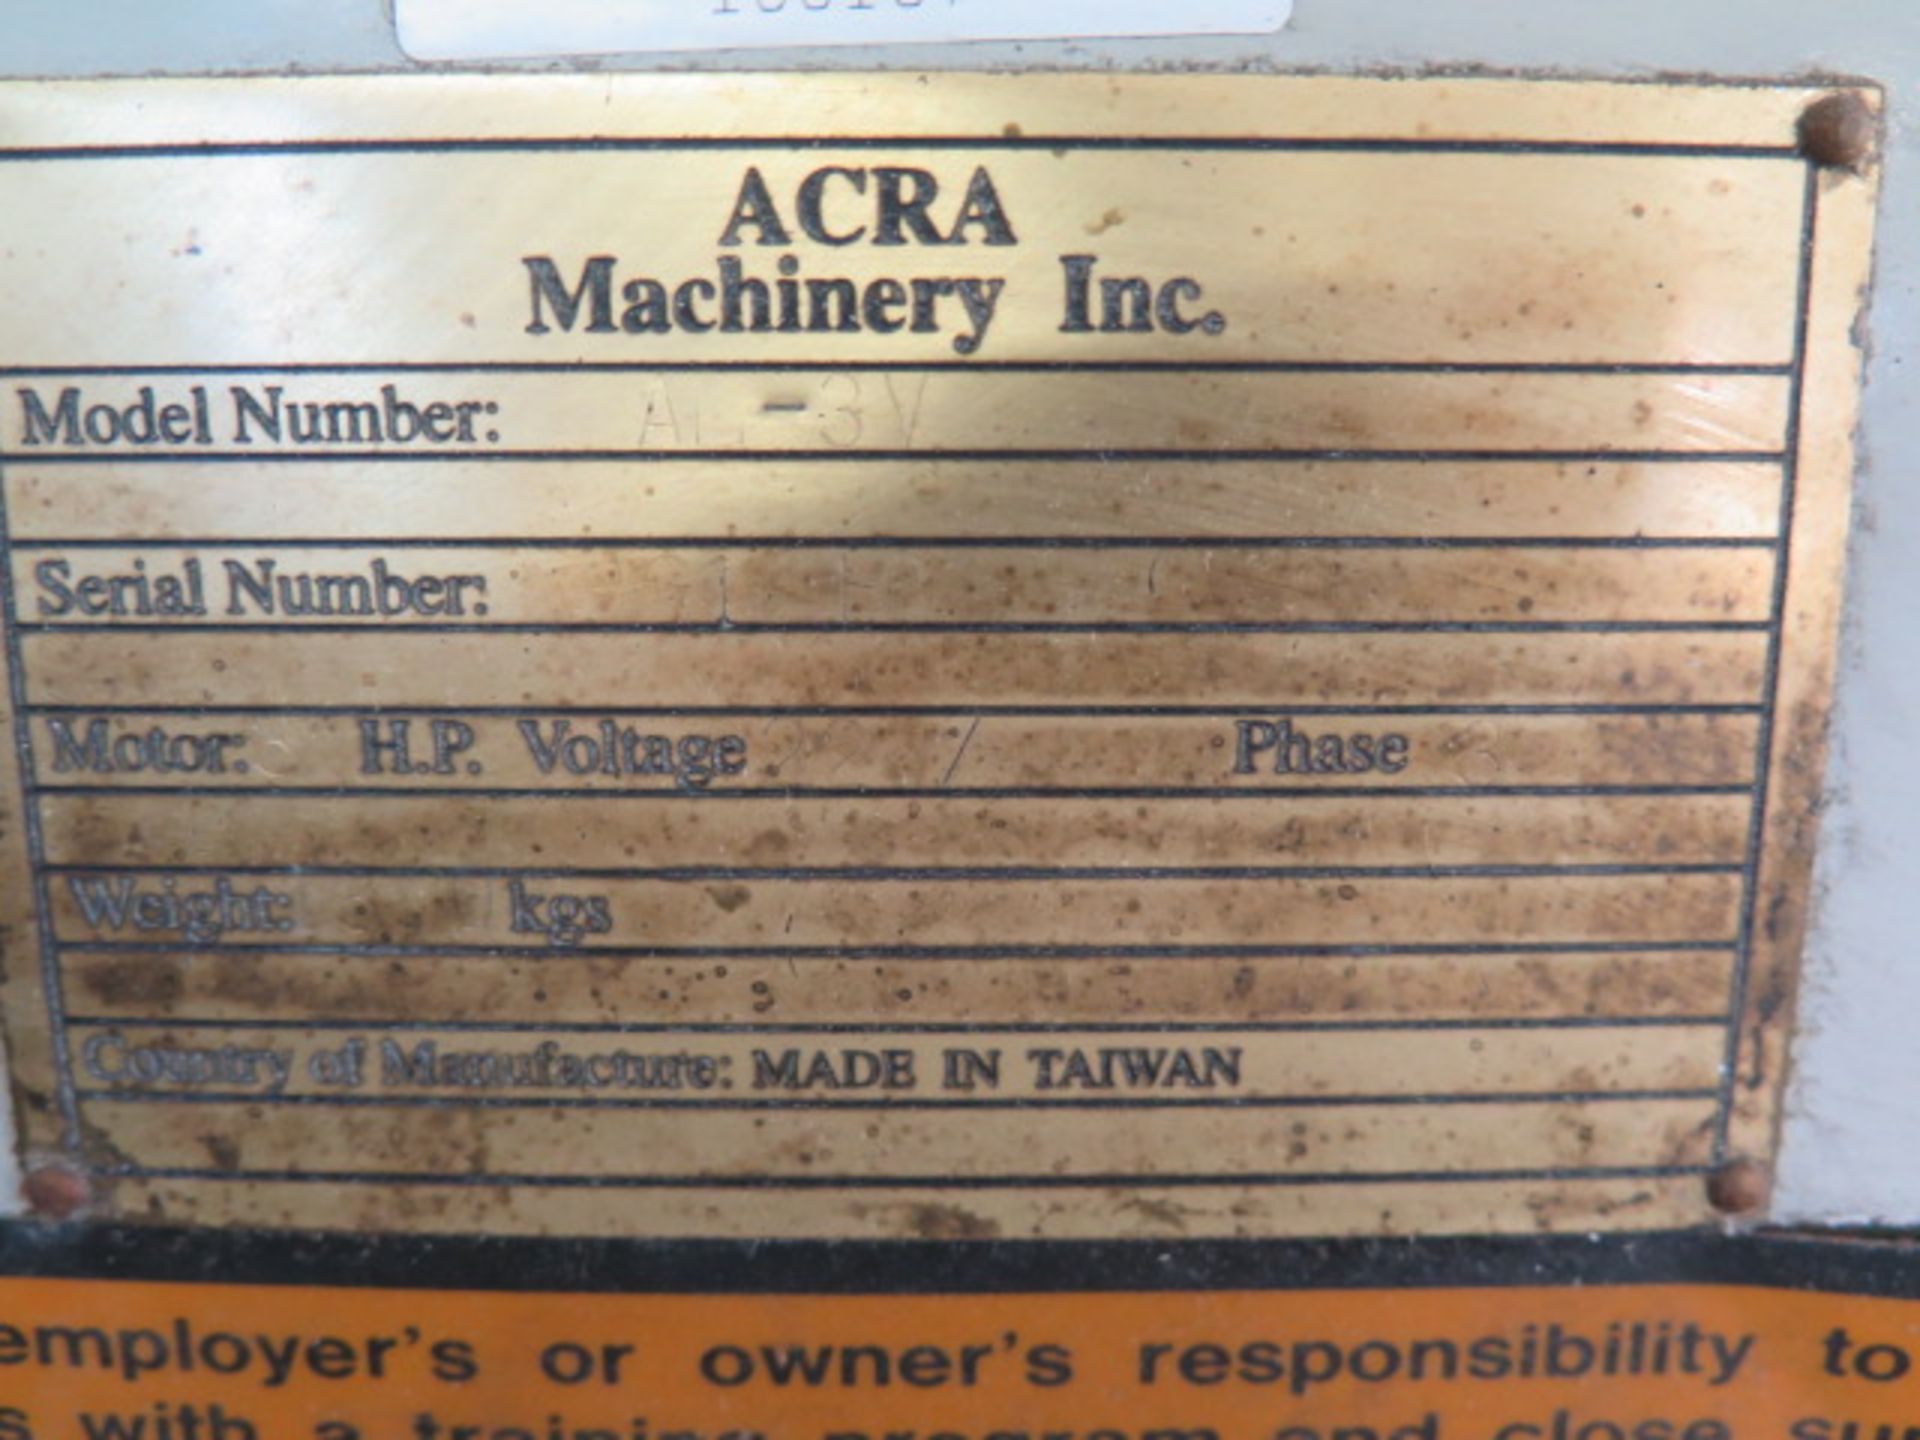 Acra AM-3 Vertical Mill s/n 961819 w/ Sargon 3-Axis DRO, 3Hp Motor, 60-4200 Dial RPM, Sold AS IS - Image 13 of 13